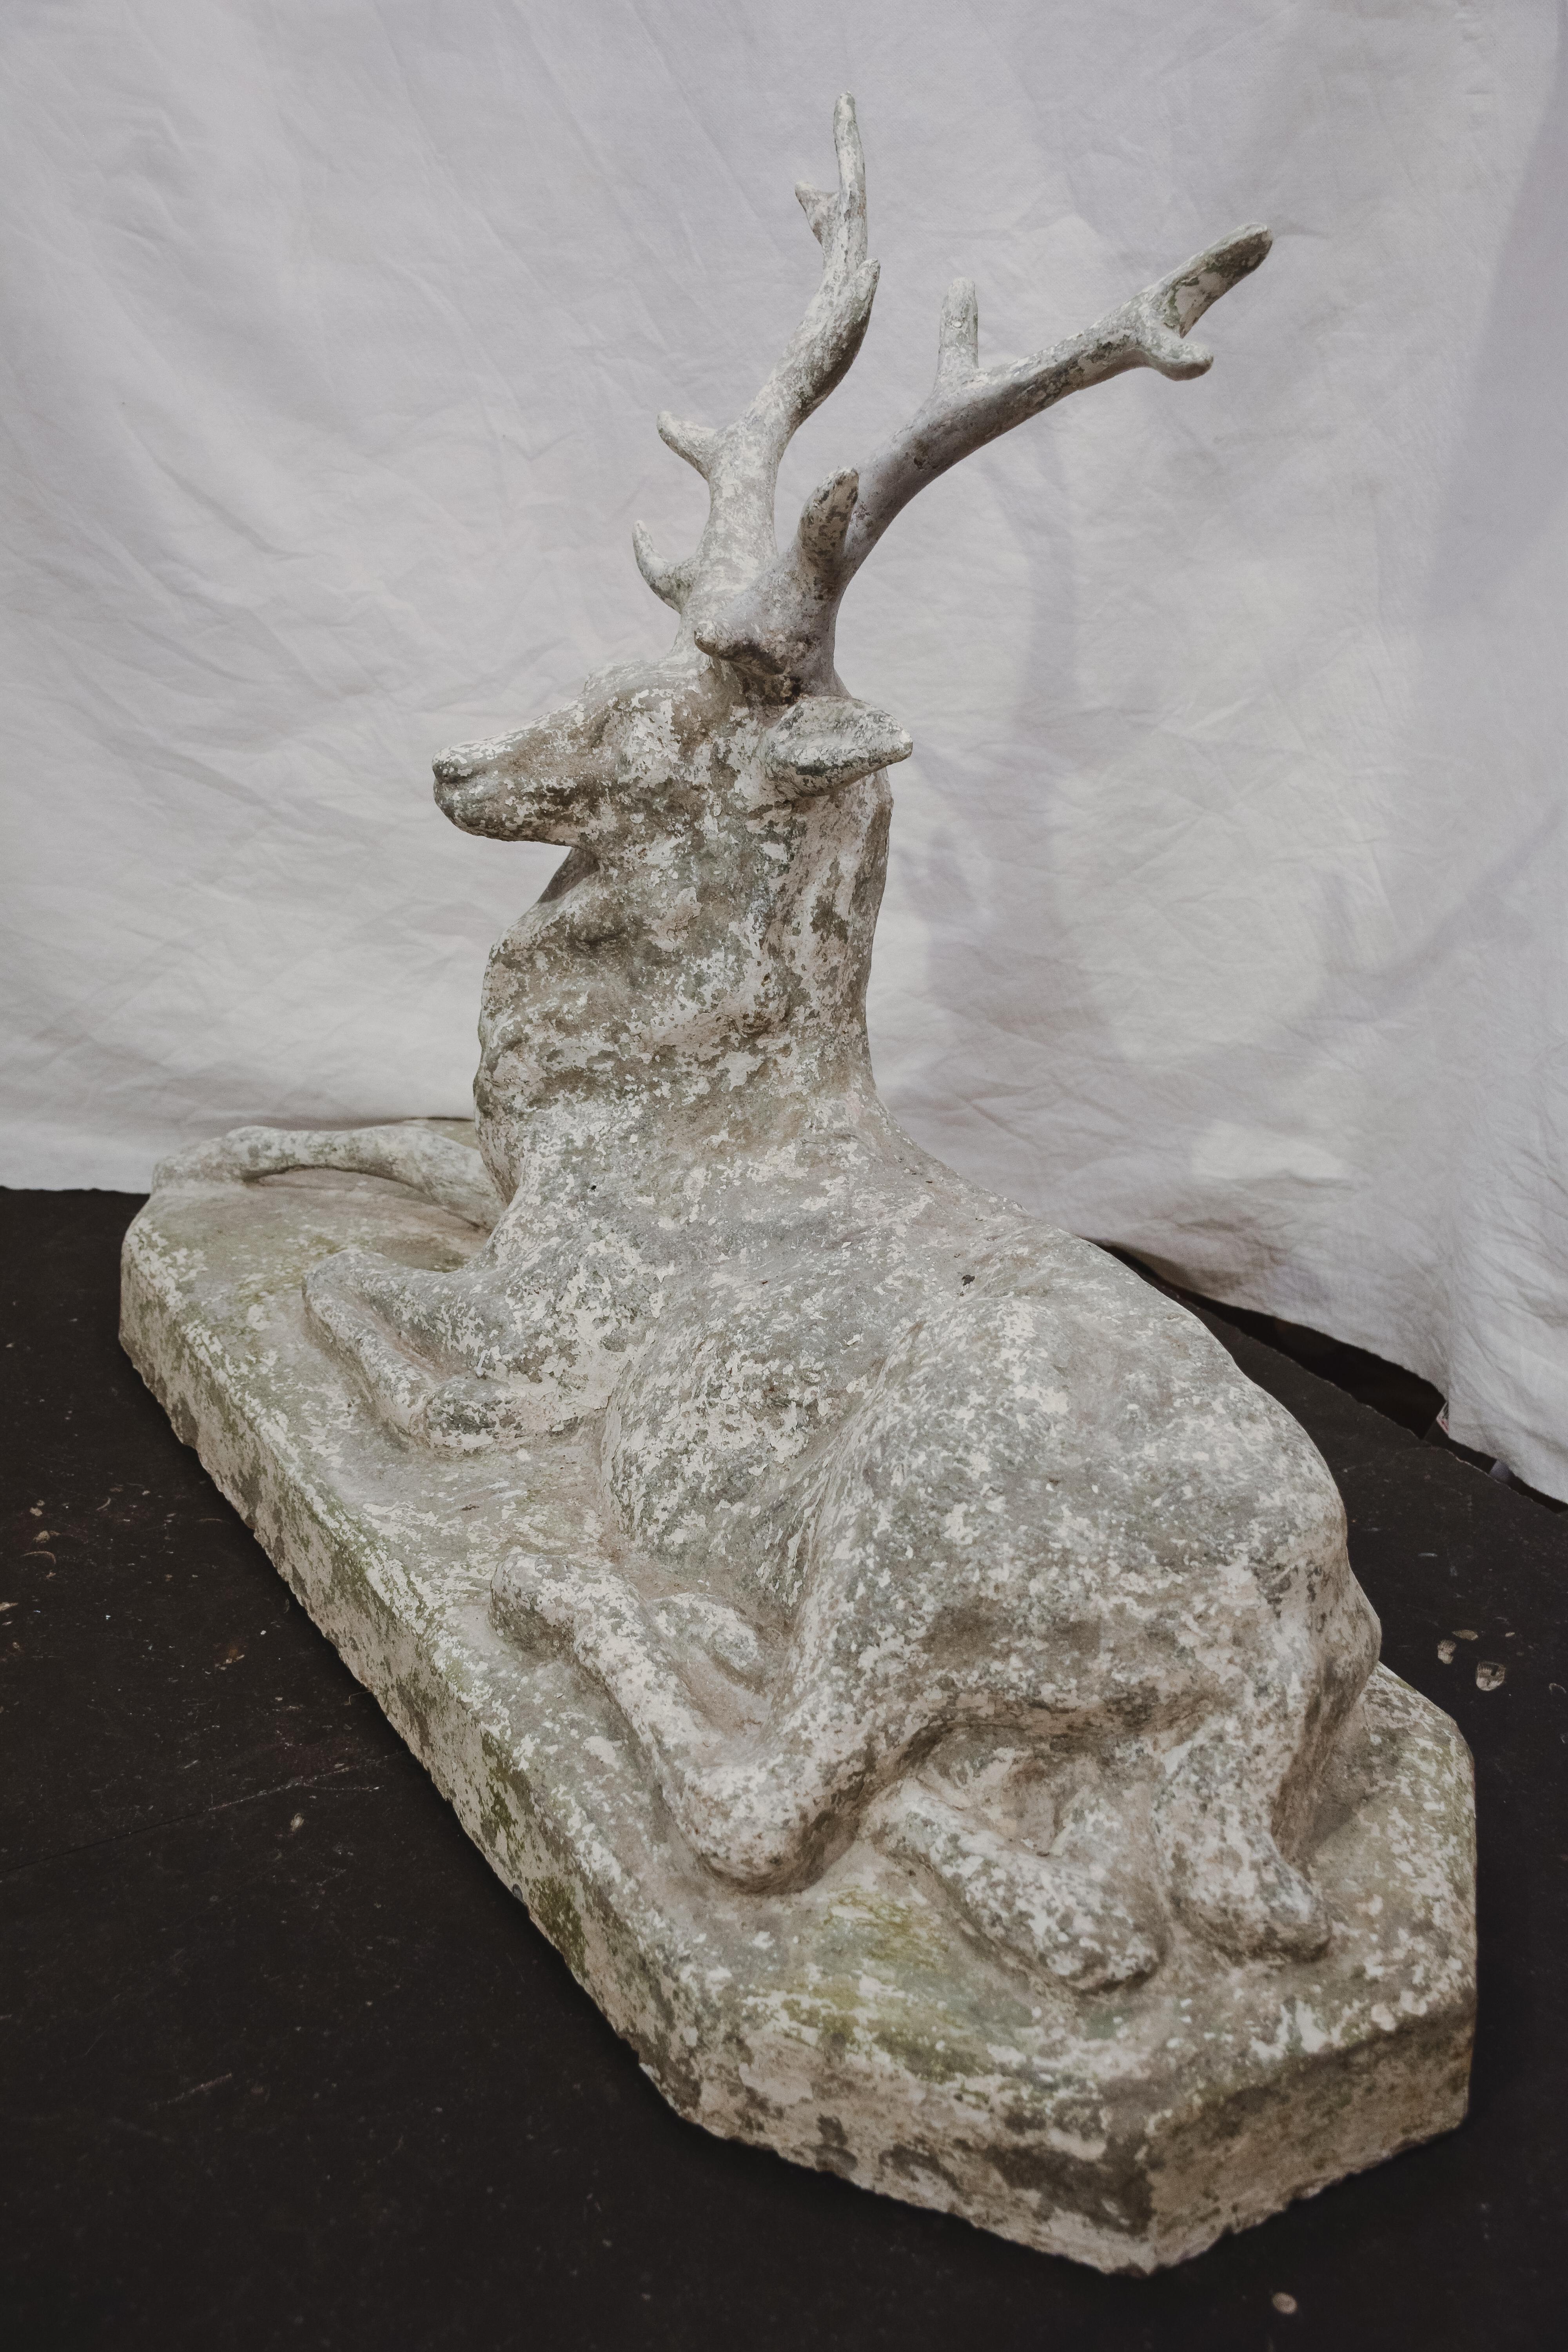 A reconstituted stone reclining stag sculpture from the early 20th century, with nicely weathered patina. The sculpture depicts a stag laying on a conforming base. Boasting a nicely weathered appearance revealing its age and life outdoors, this